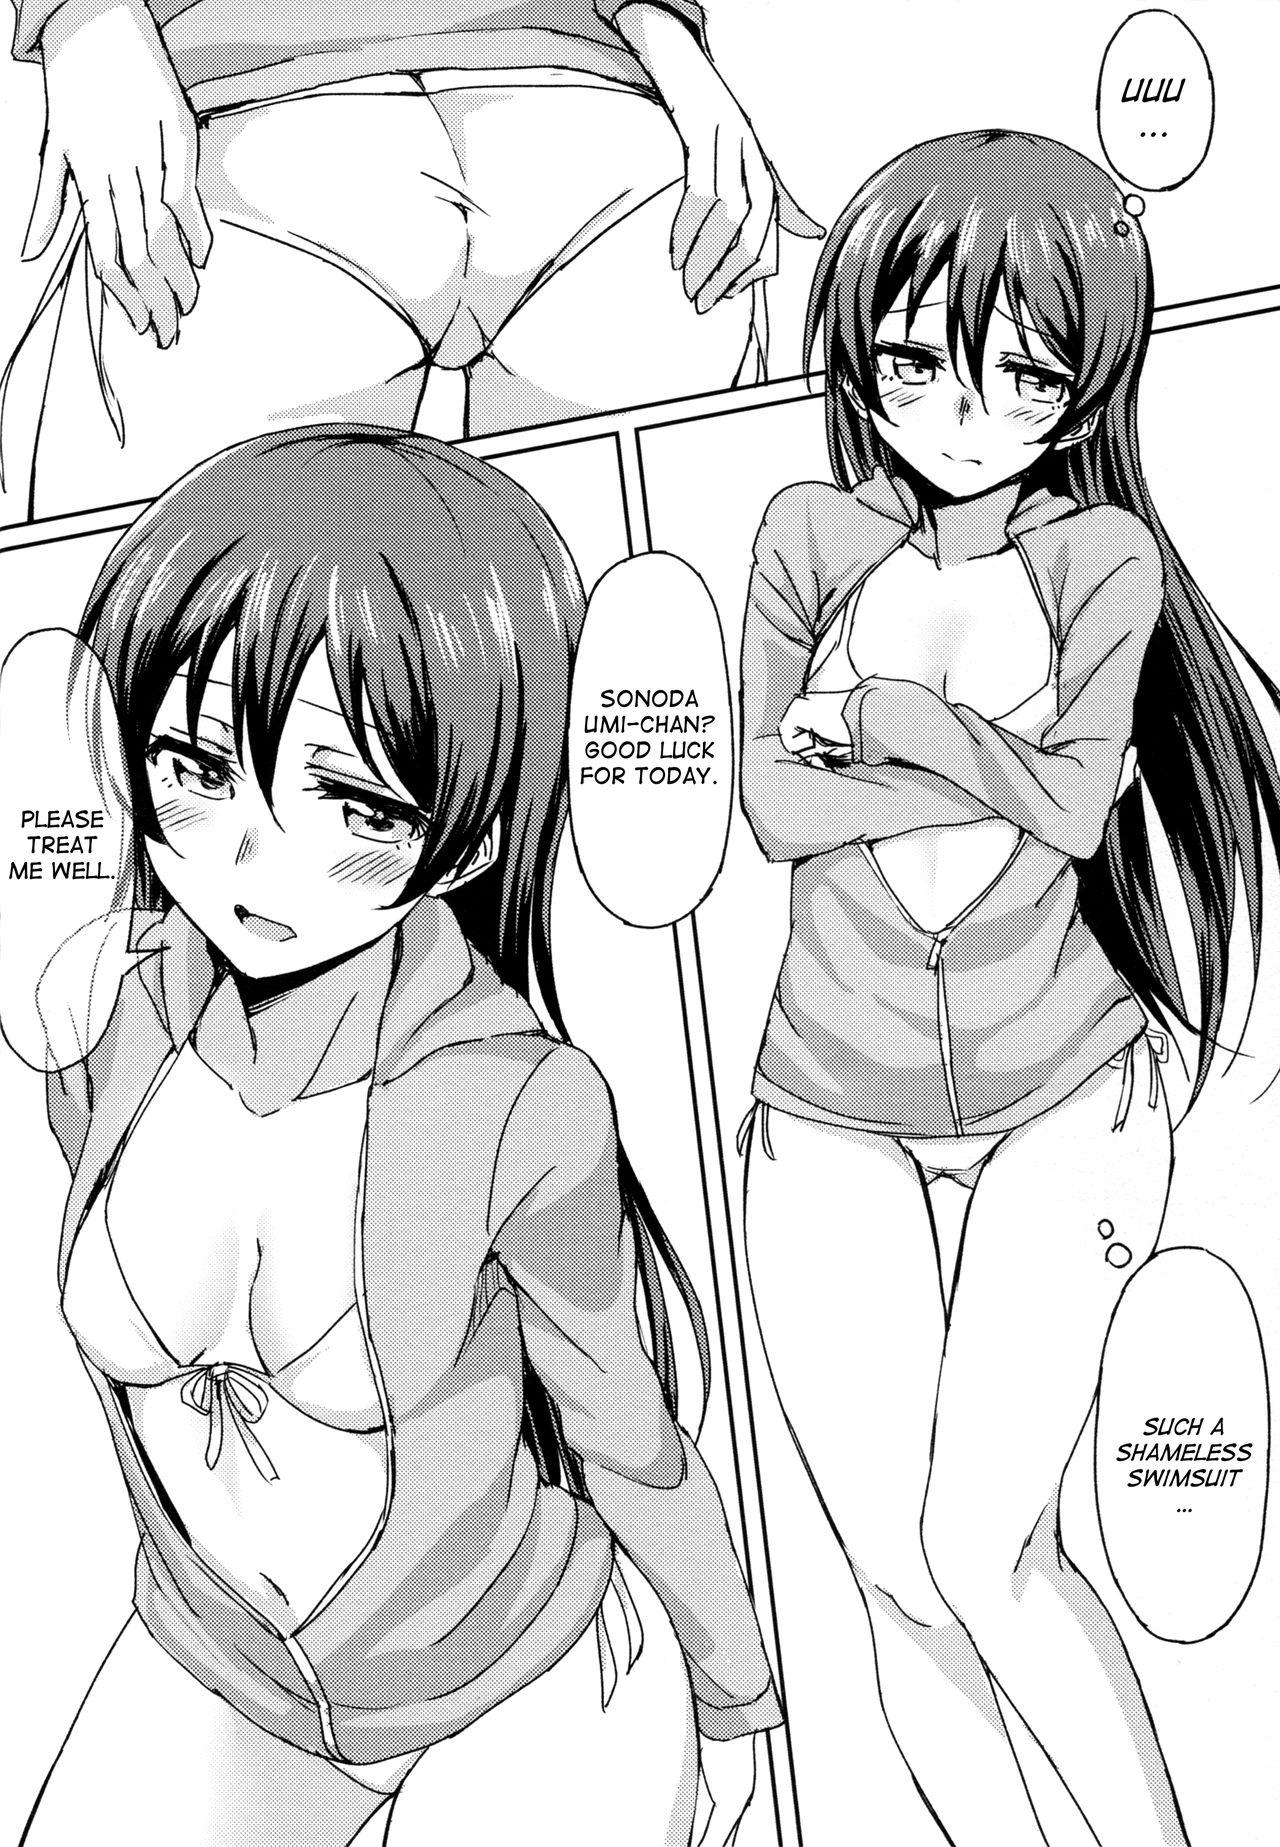 Best Blowjob Hah,Wrench This! - Love live Jock - Page 6